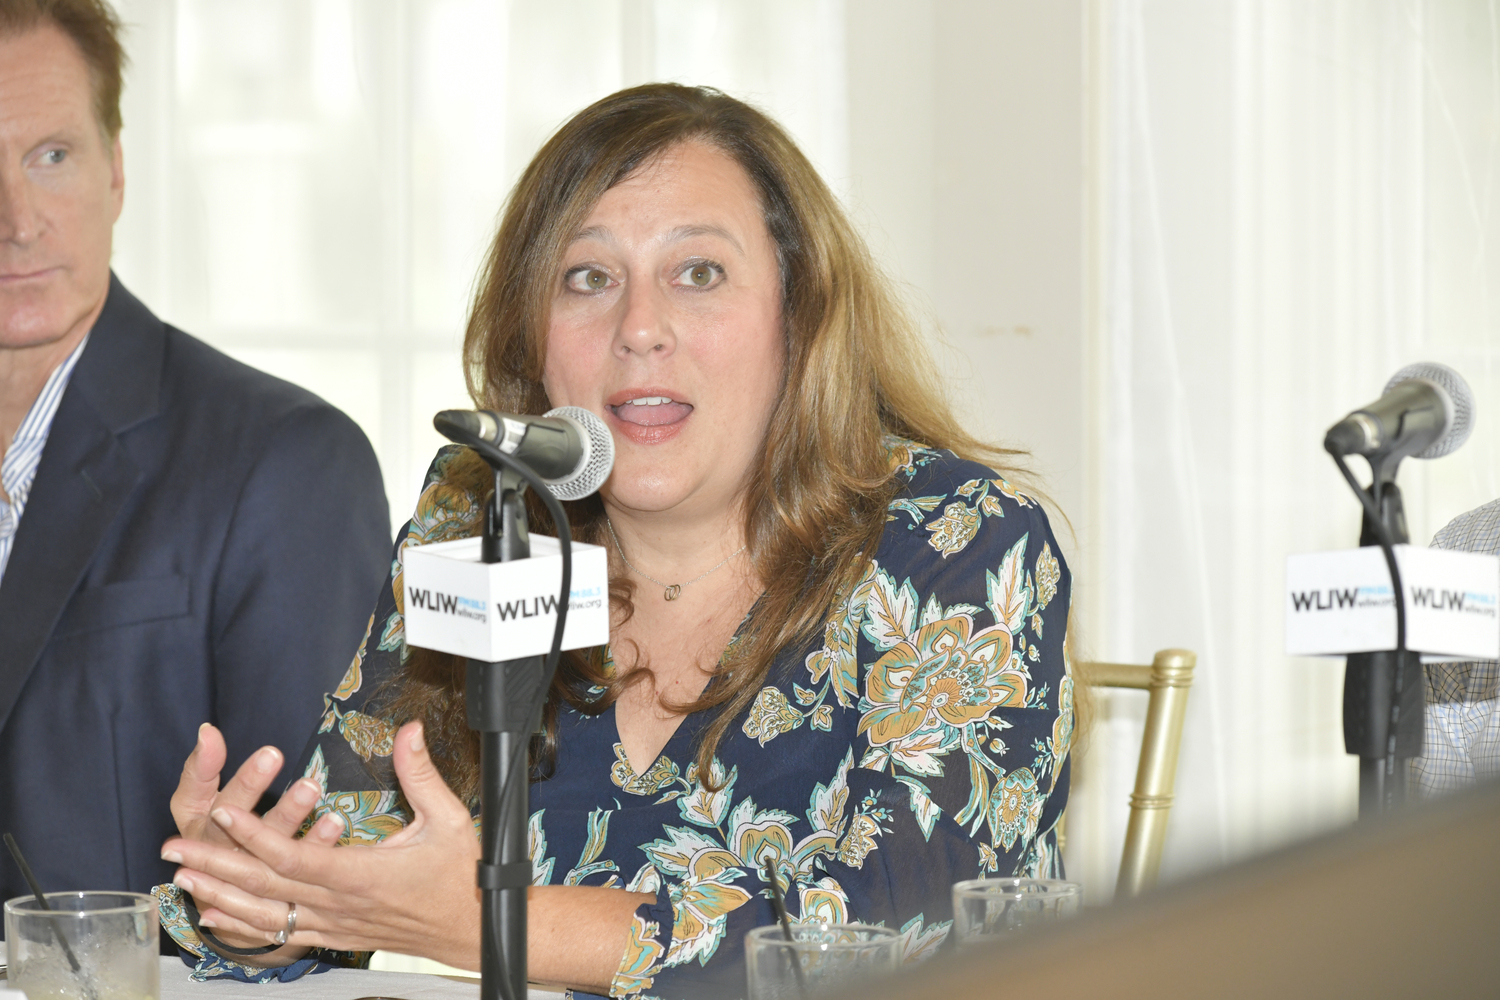 Panelist Southampton Town Planning Director Janice Scherer at the Express Sessions event on September 28.  DANA SHAW